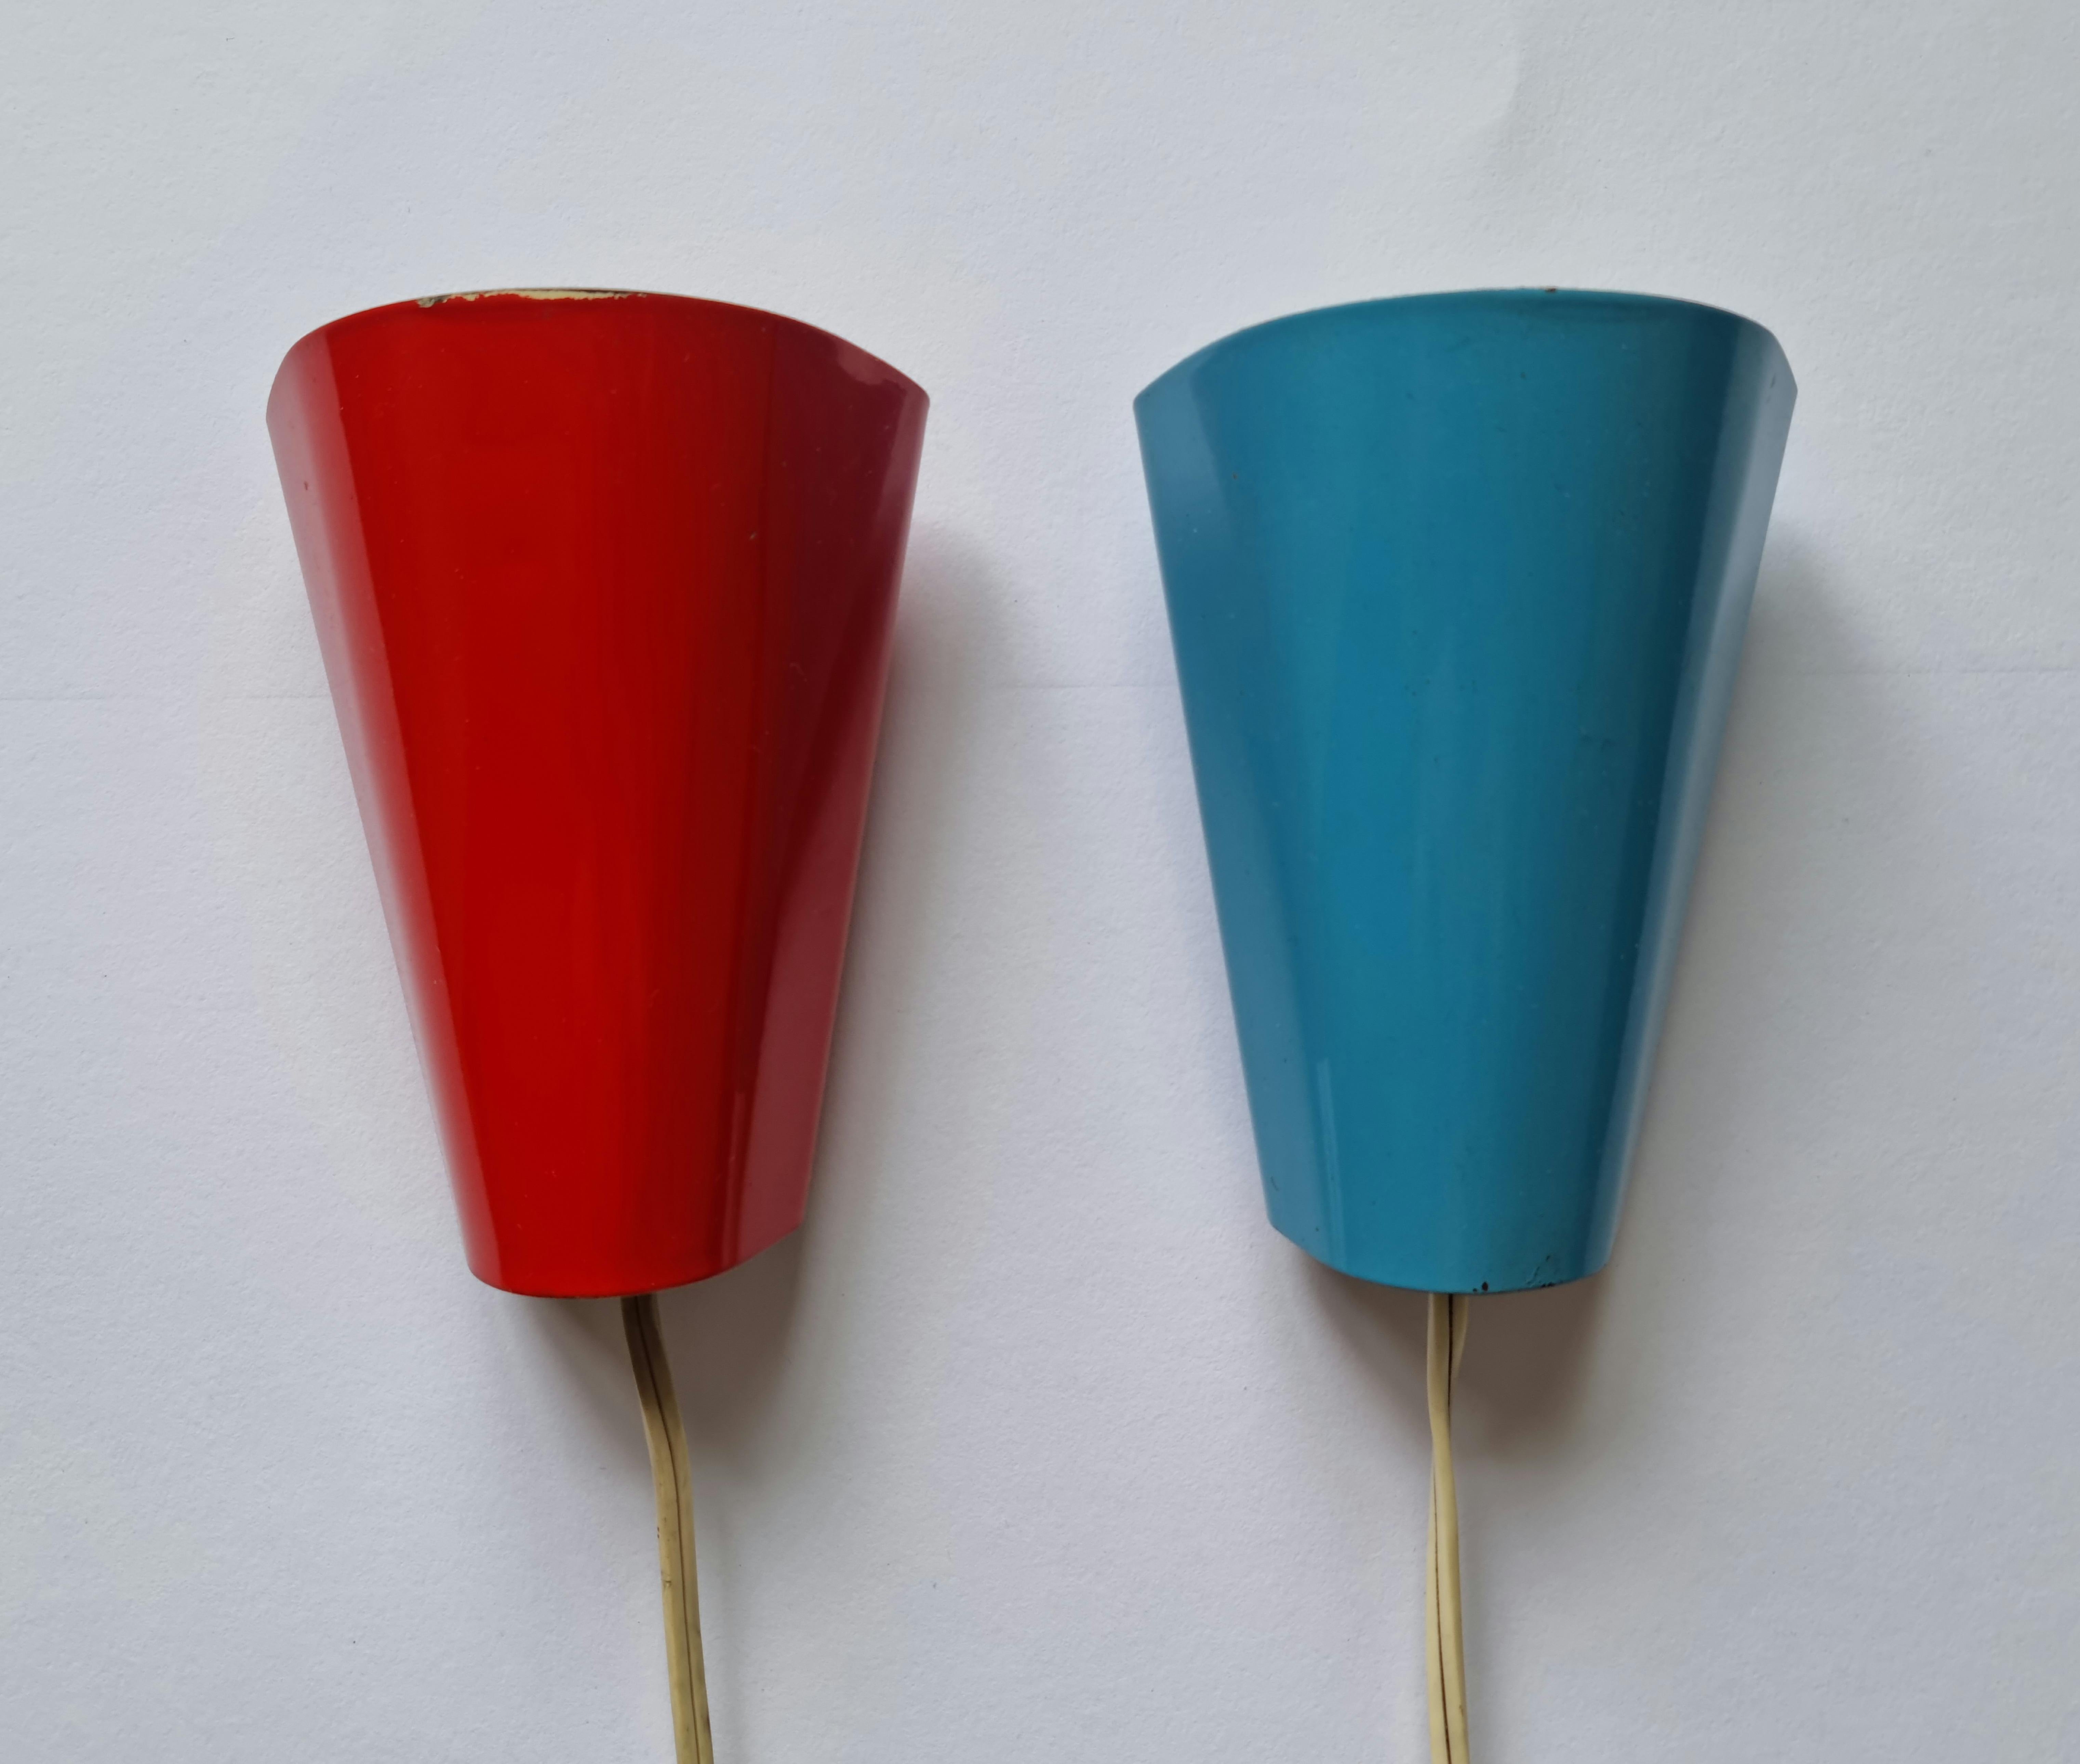 Lacquered Set of 2 Midcentury Wall Lamps, Lidokov, Josef Hurka, 1960s For Sale